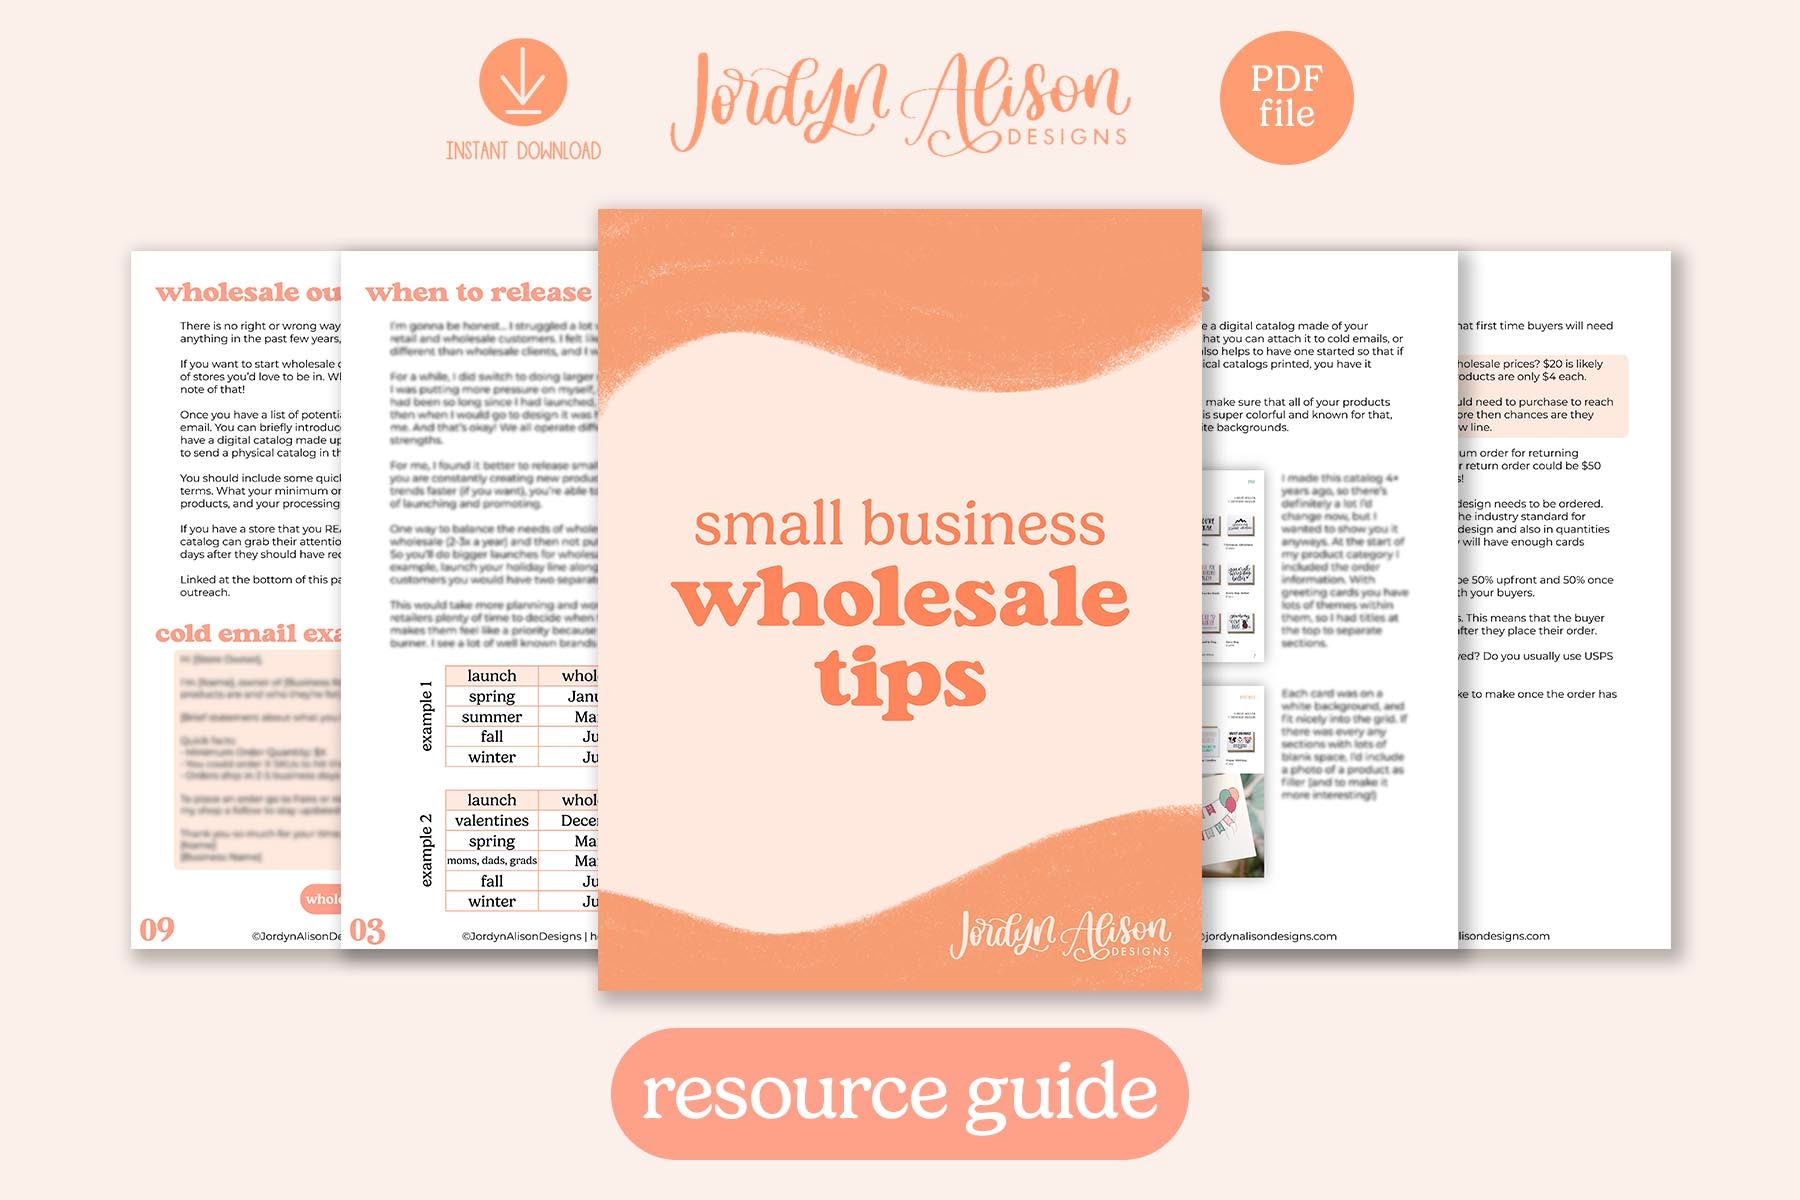 How to Wholesale: Resource Guide